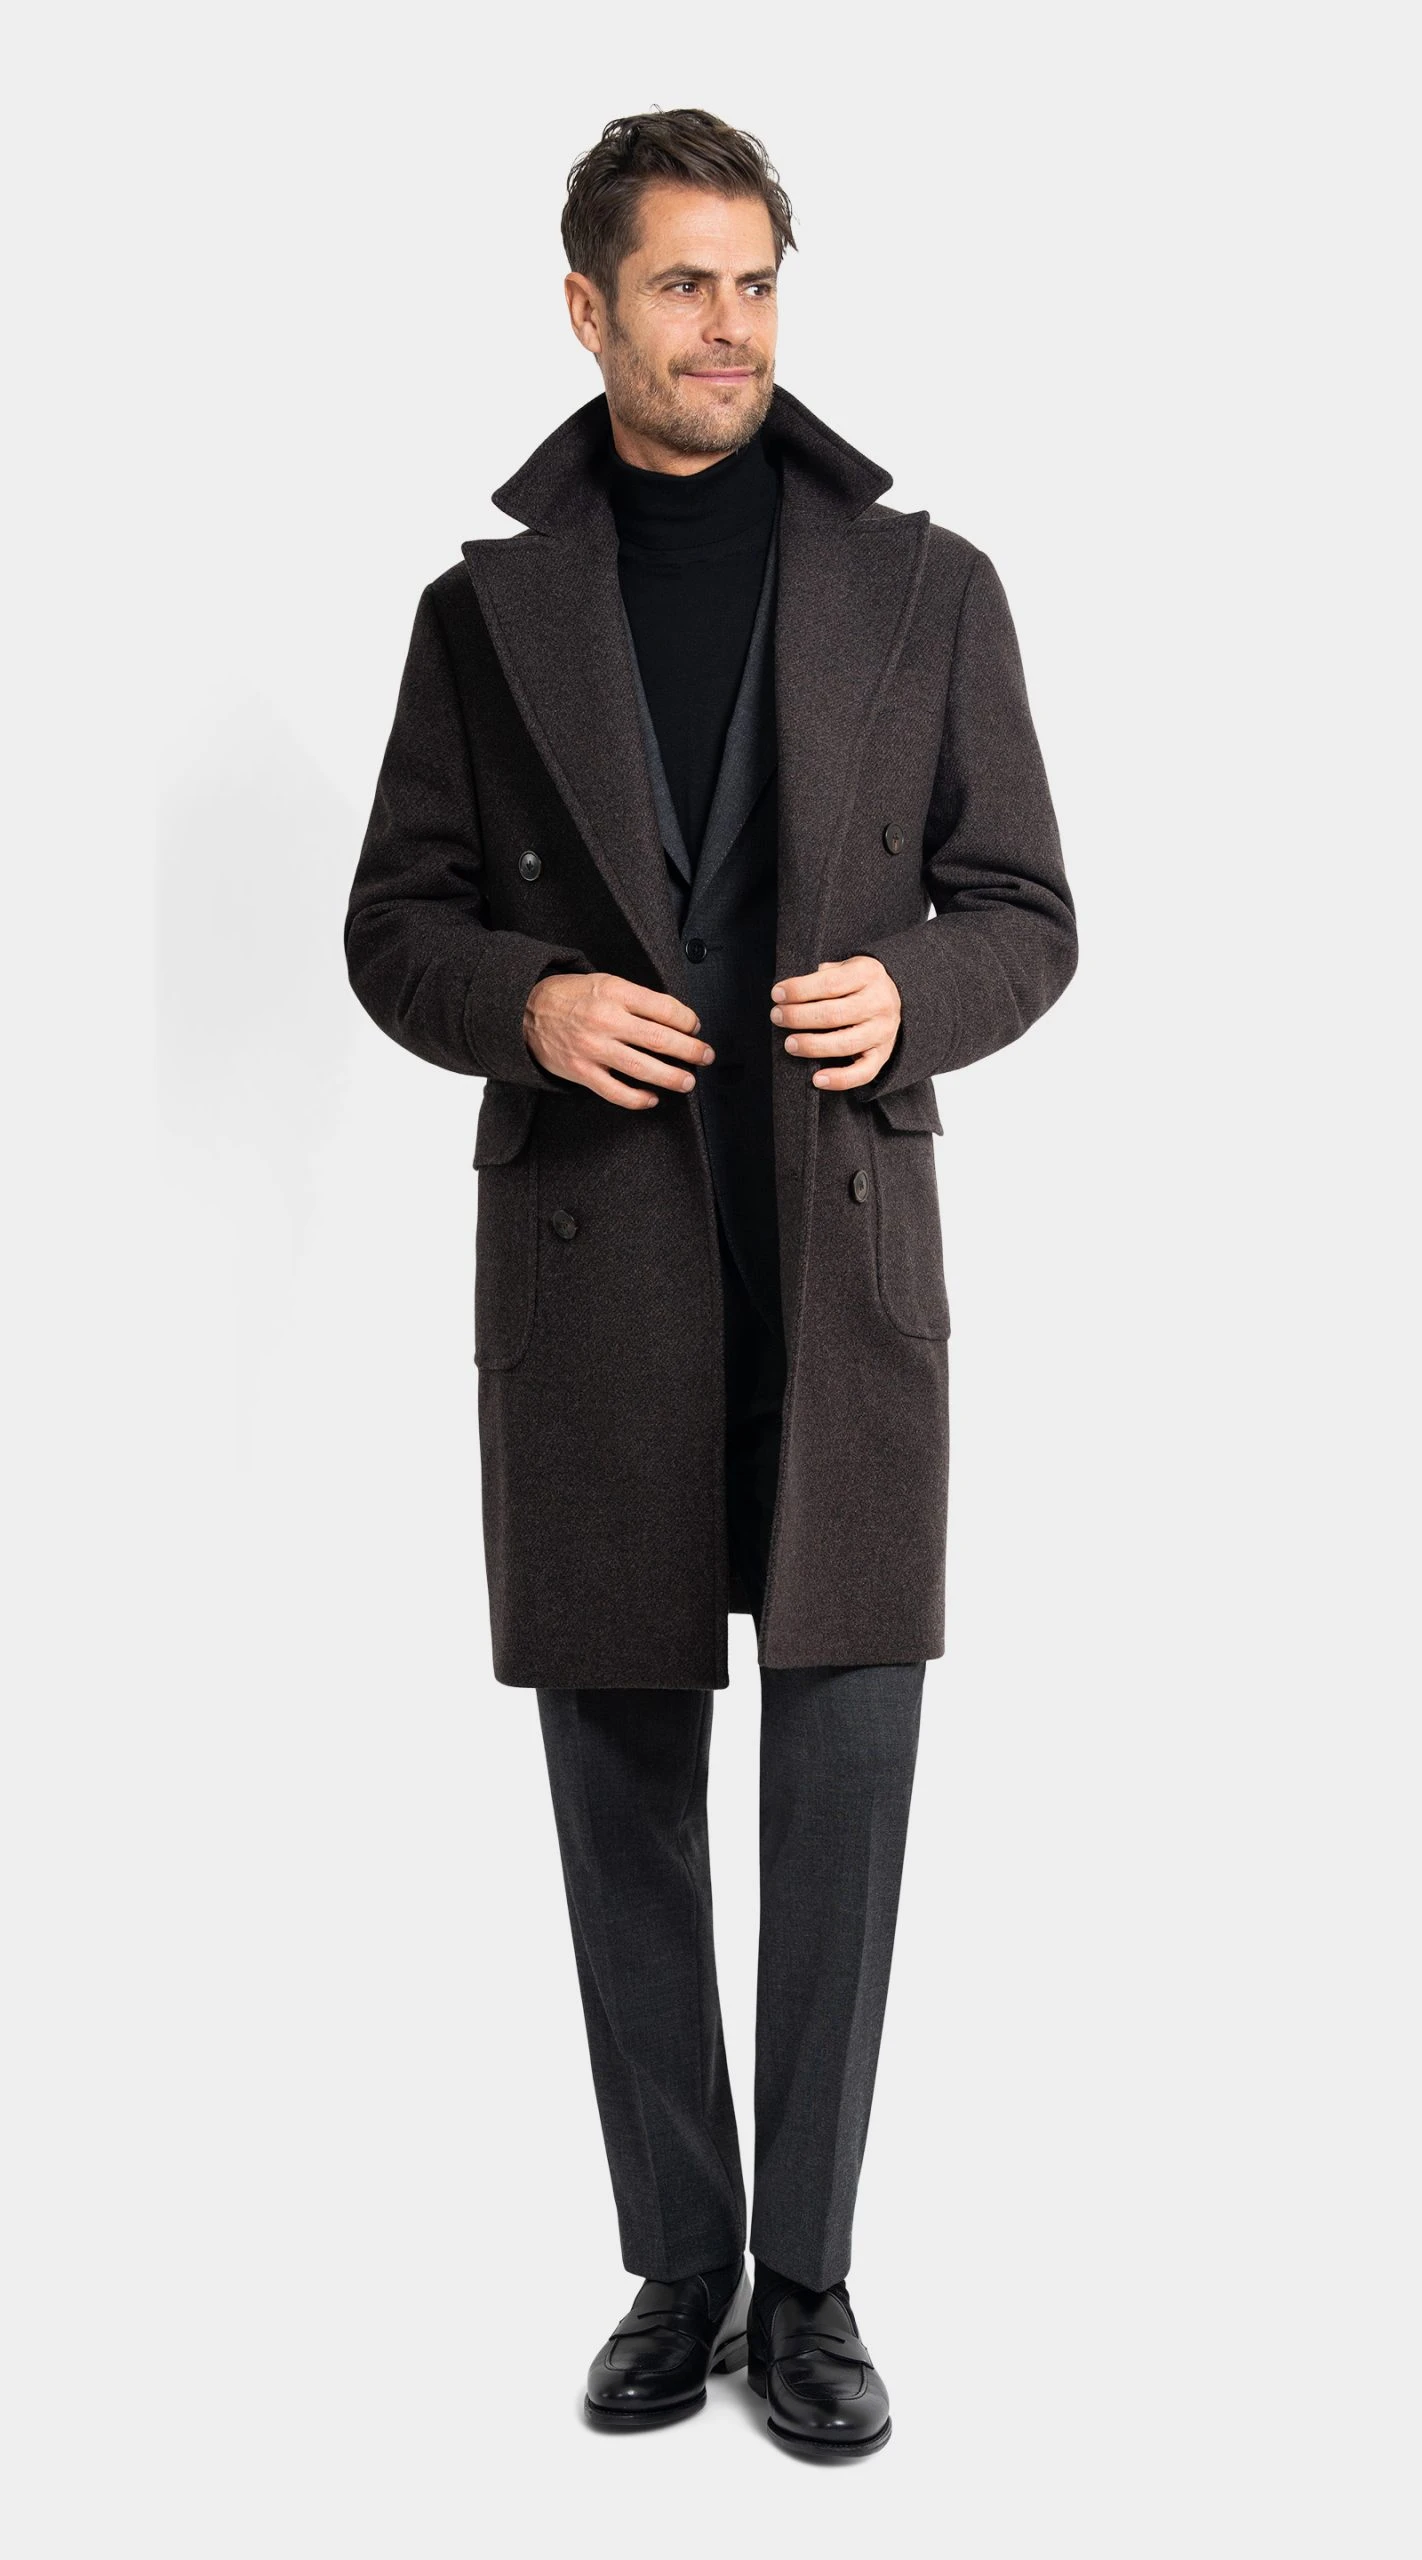 cashmere coat in brown, double-breasted